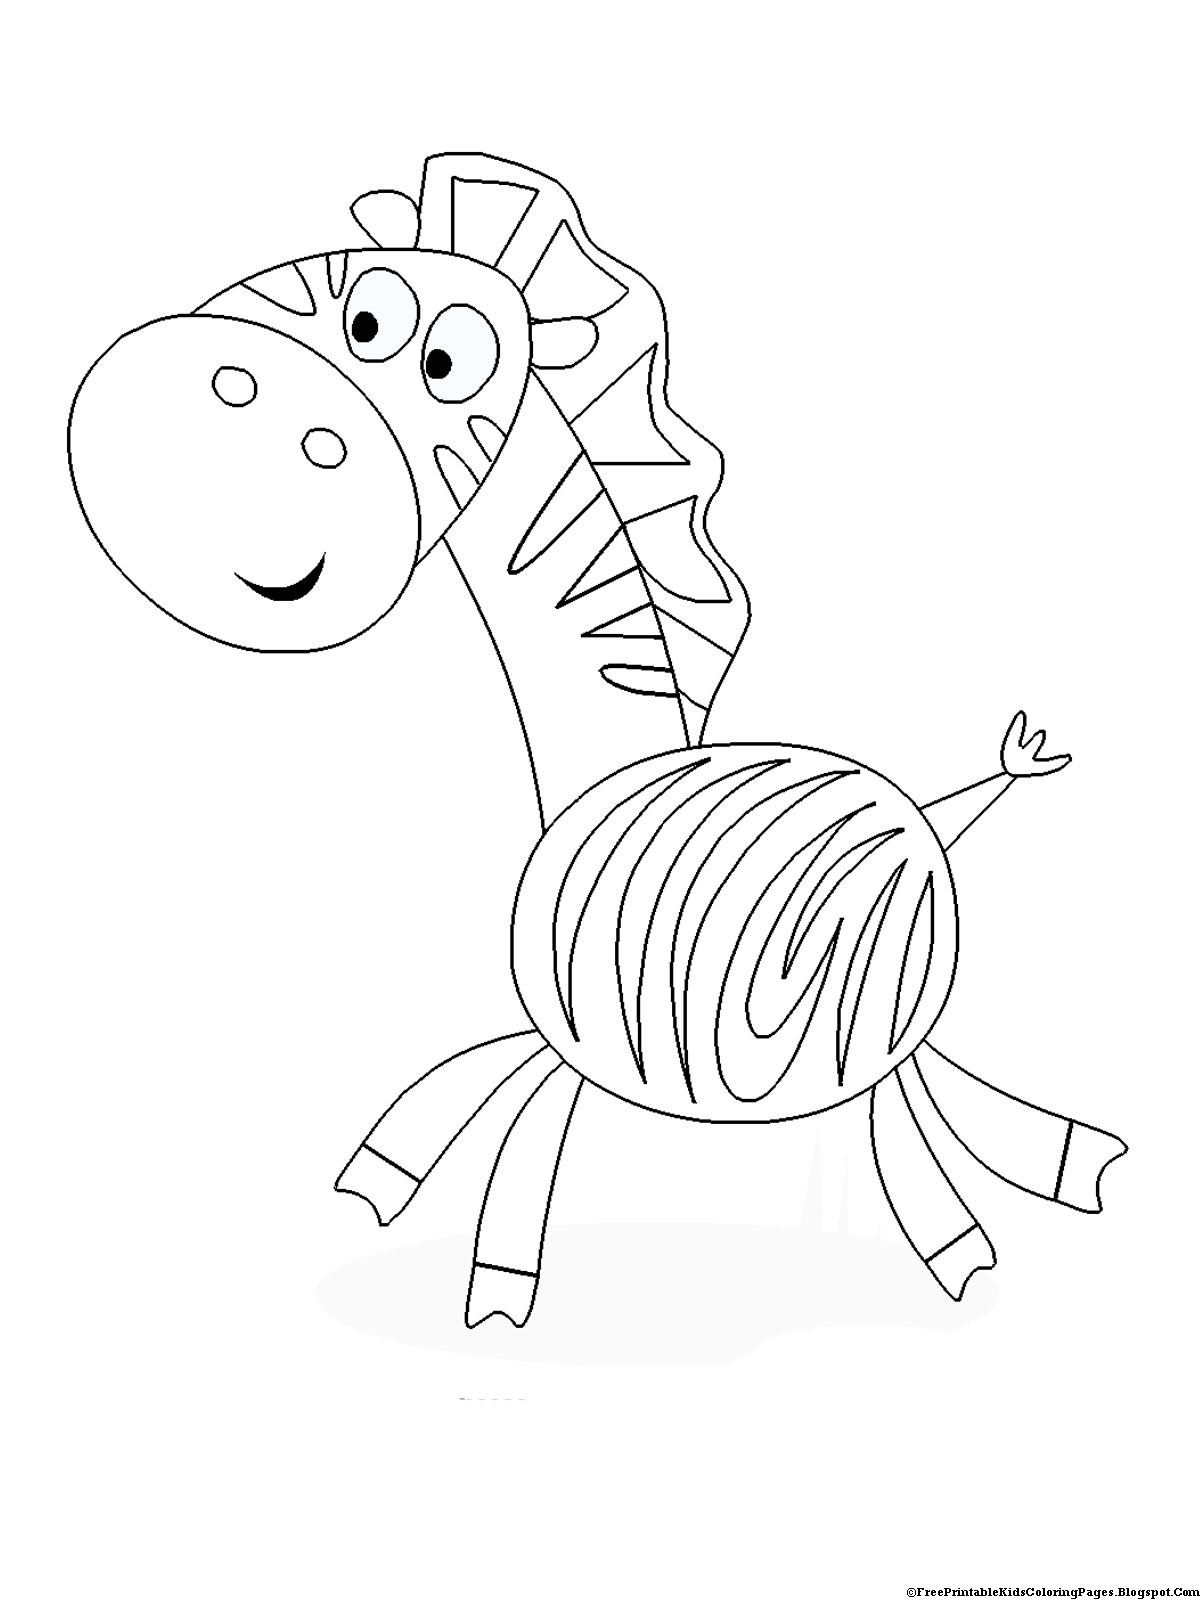 Printable Coloring Pages For Kids Animals
 Zebra Coloring Pages